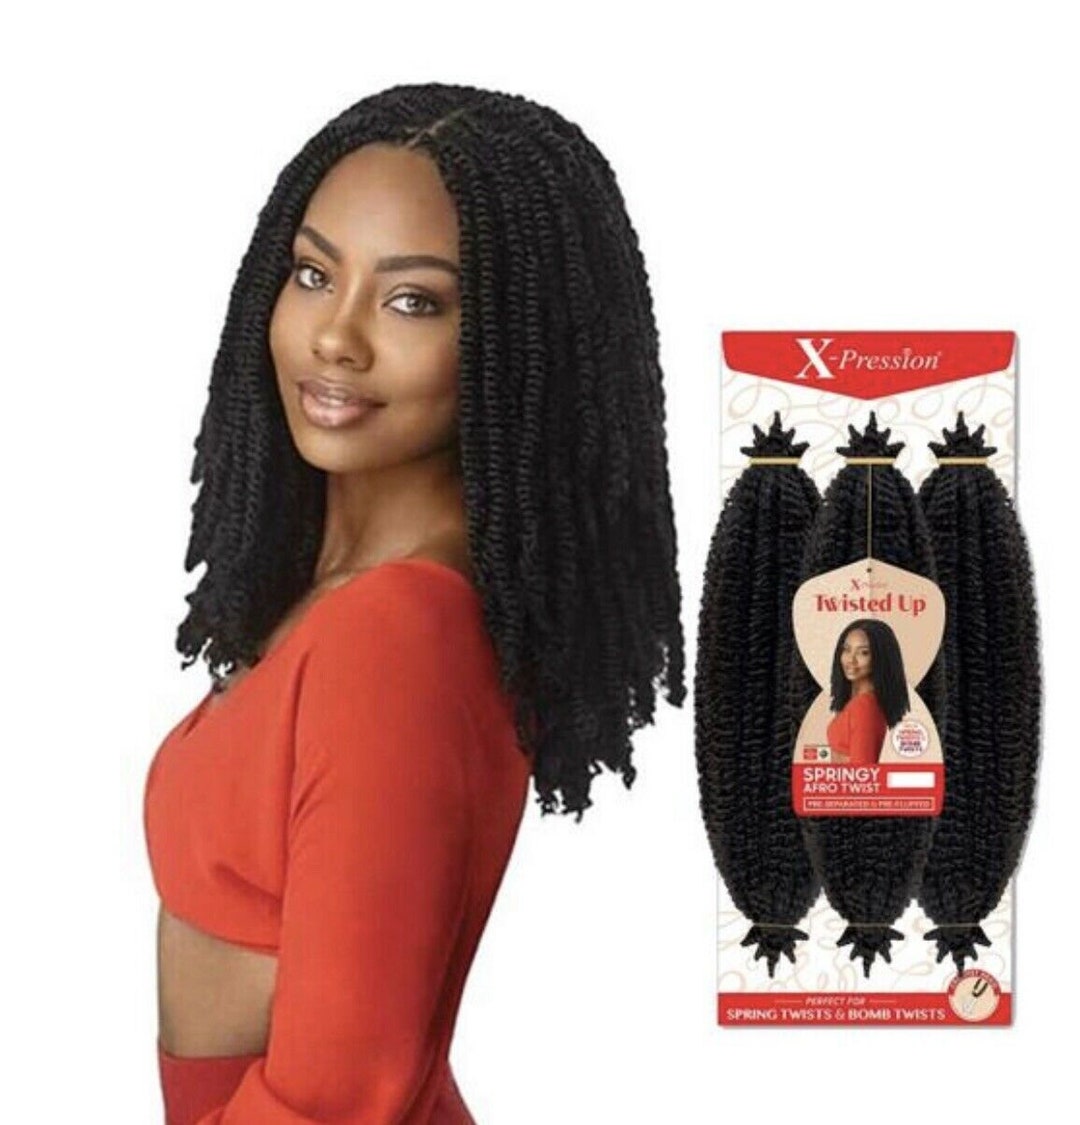 Outre X-pression Twisted up Crochet Braid Springy Afro Twist 16 Color 1B -   Canada